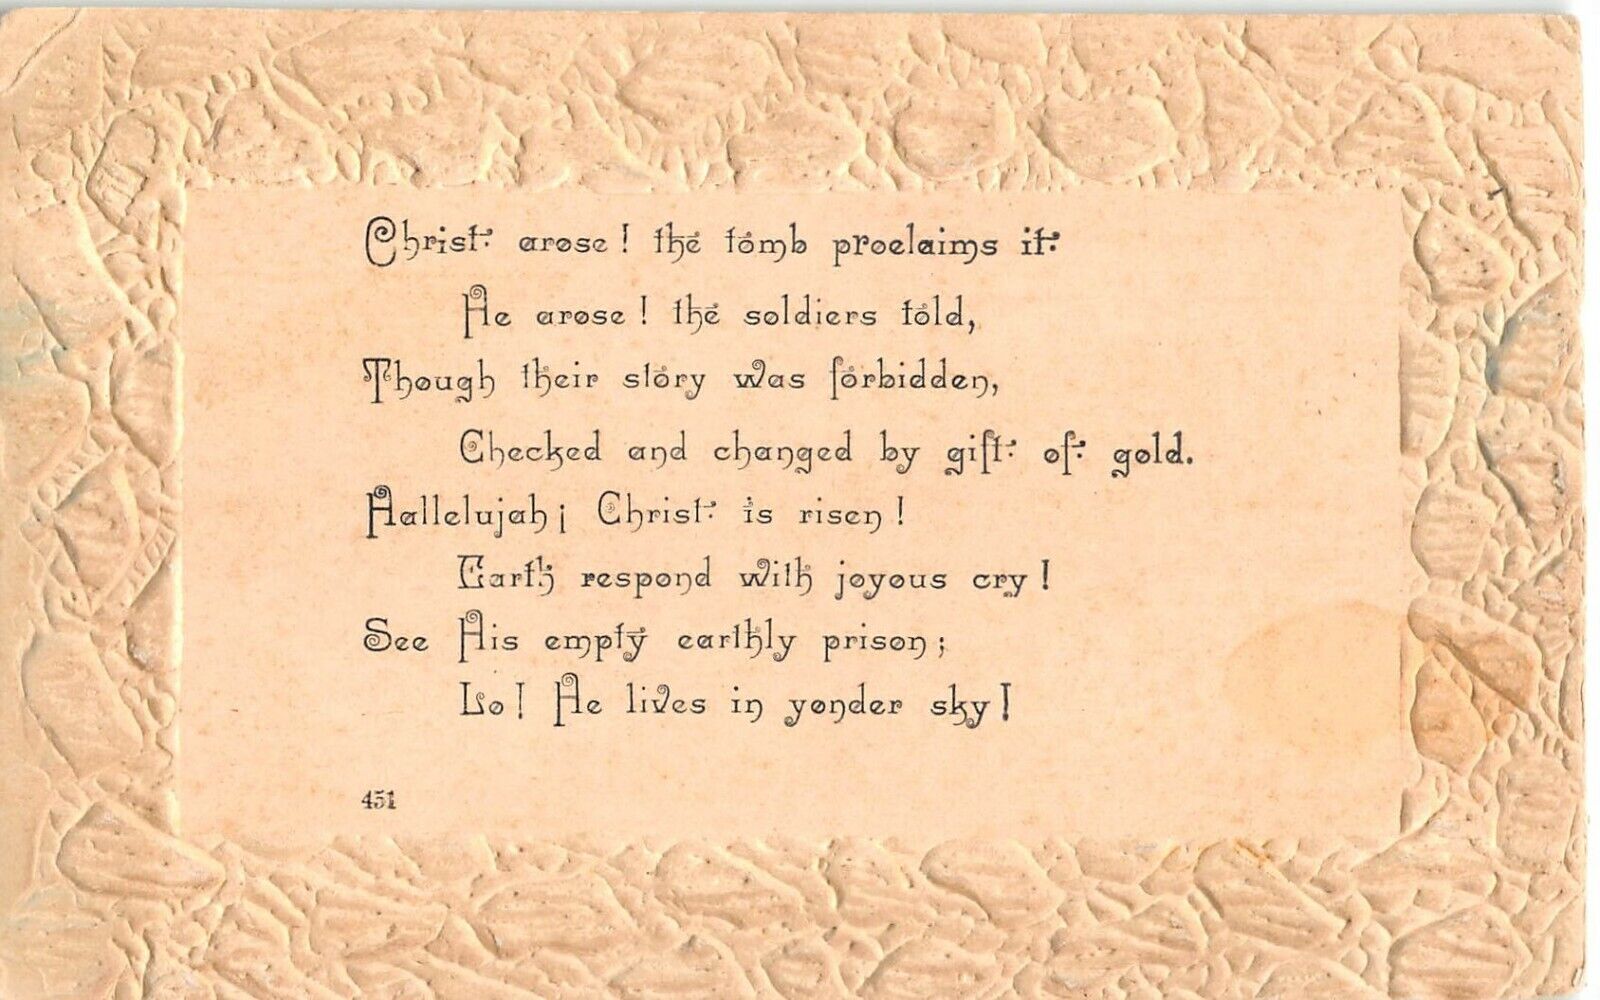 Embossed Borders Around Old Religious Easter Motto or Poem Postcard - No. 451